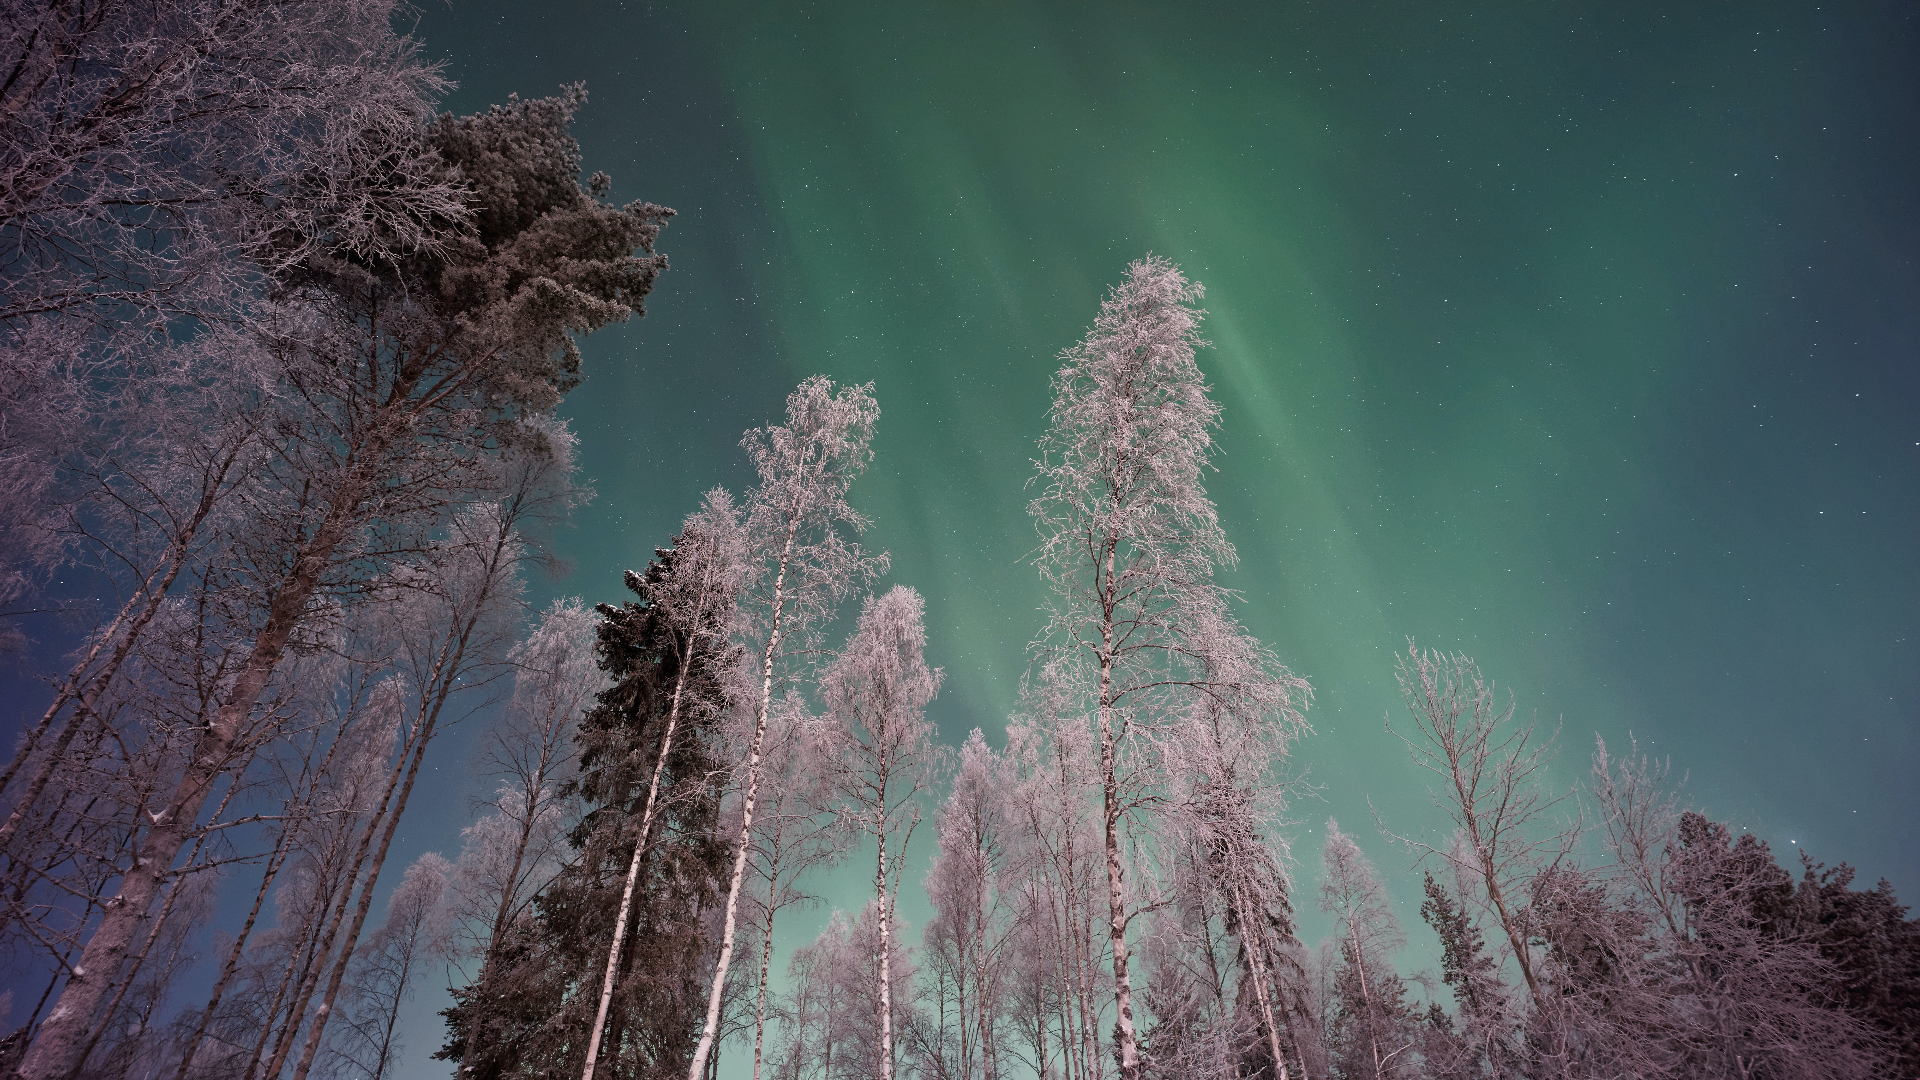 General 1920x1080 nature sky trees stars snow winter aurorae Finland low-angle